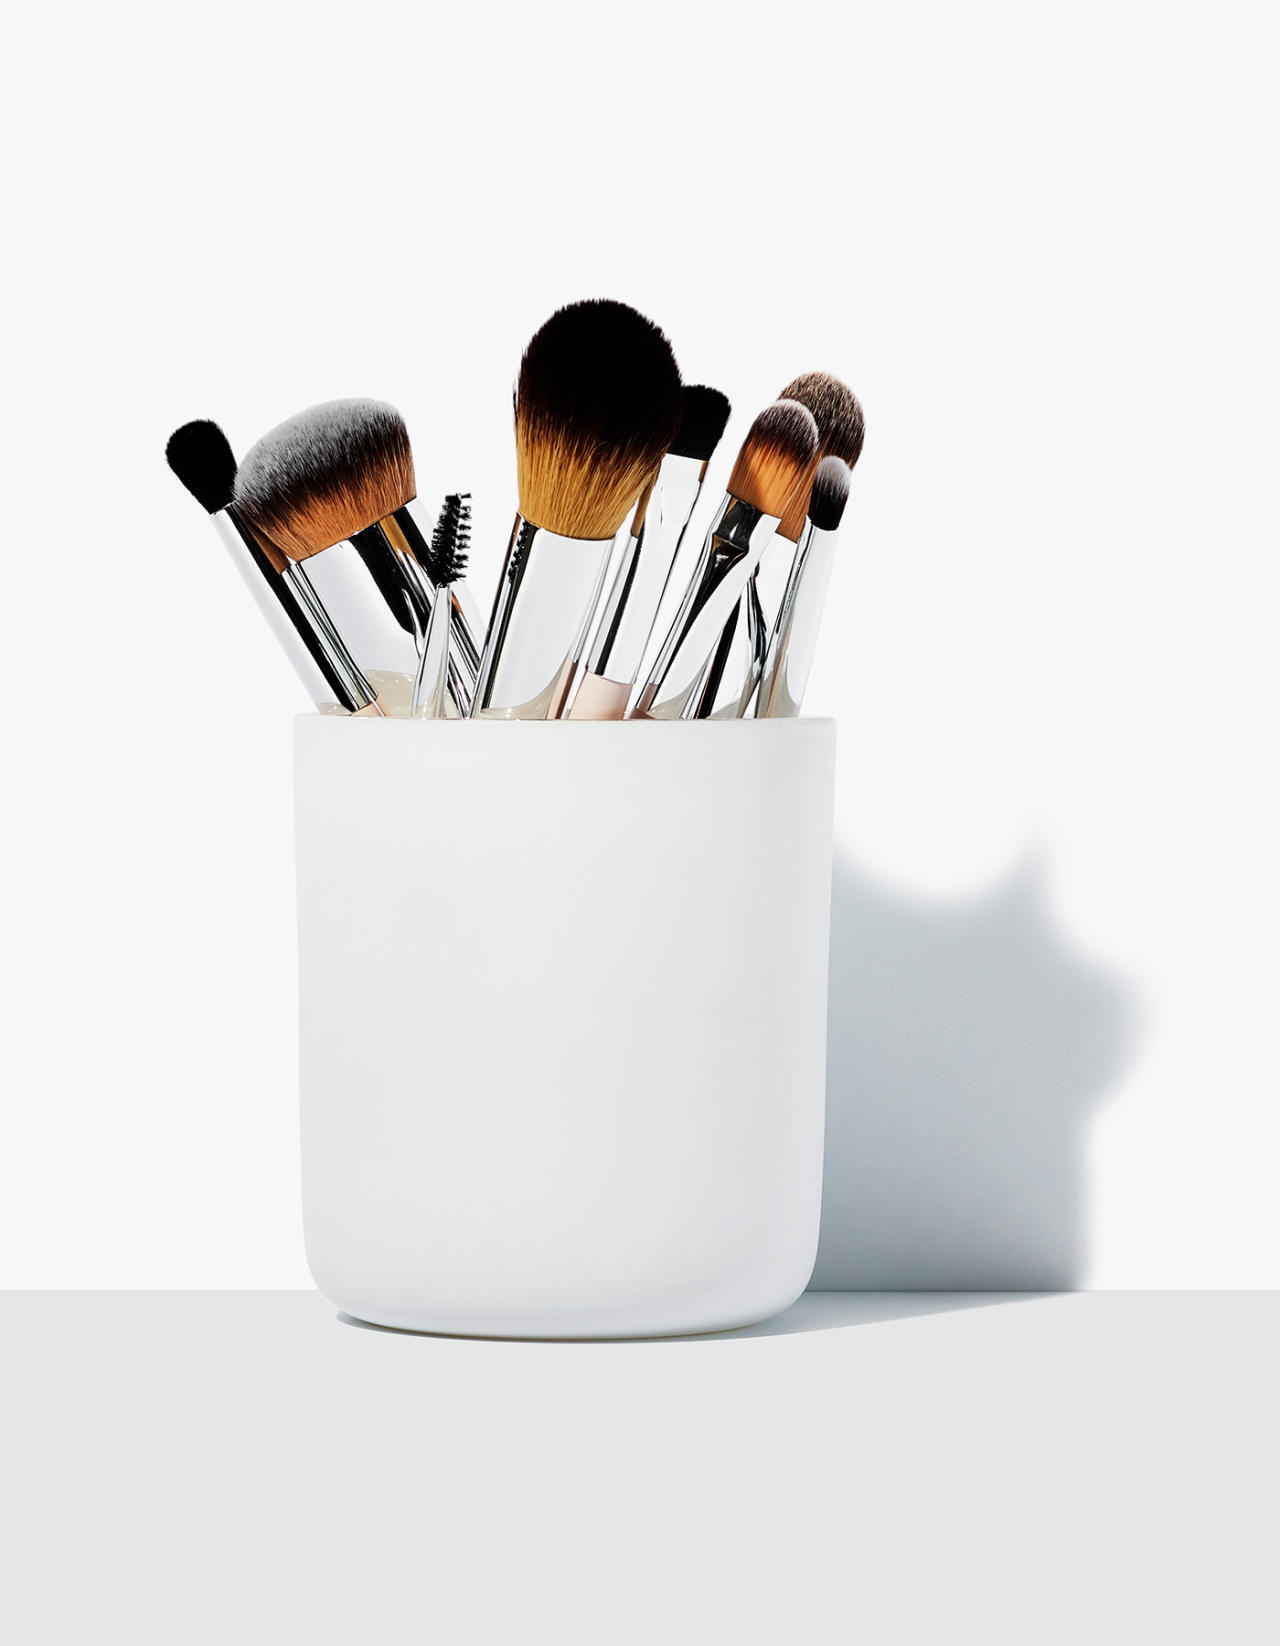 justbobbi_Diary_BeautyResolutions_Brushes